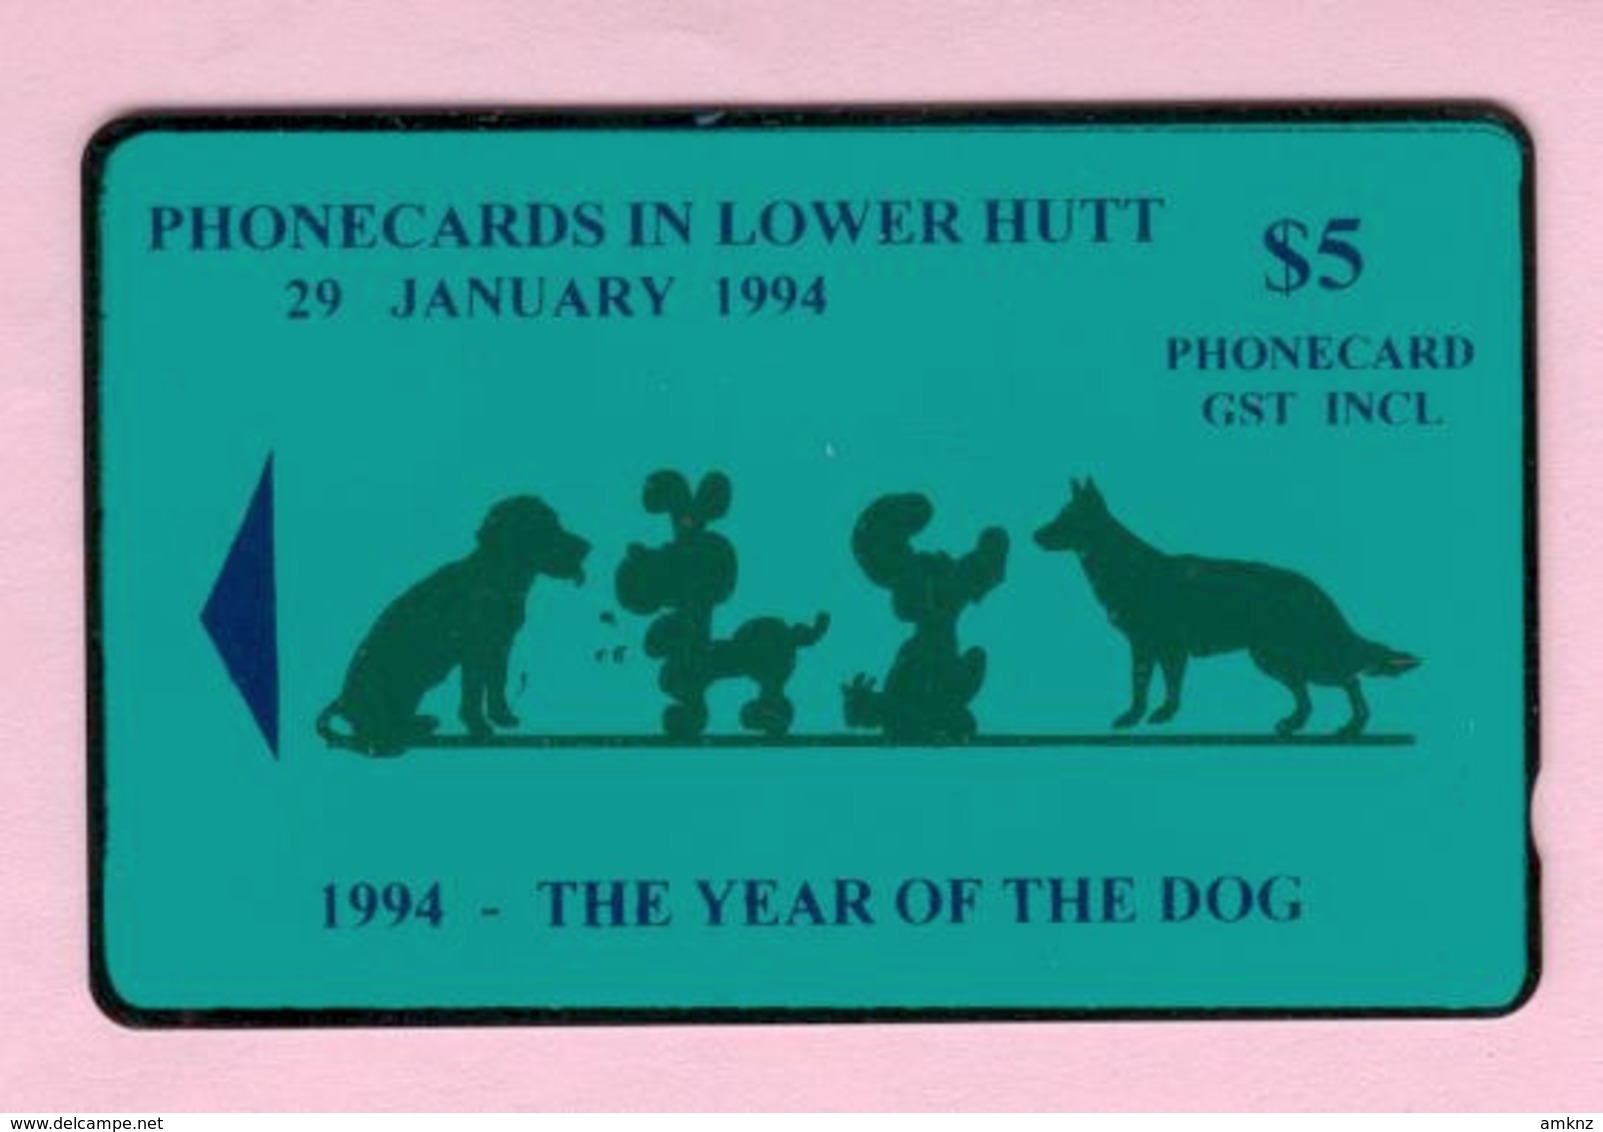 New Zealand - Private Overprint - 1994 Lower Hutt - $5 Year Of The Dog - Mint - NZ-CO-22 - Neuseeland